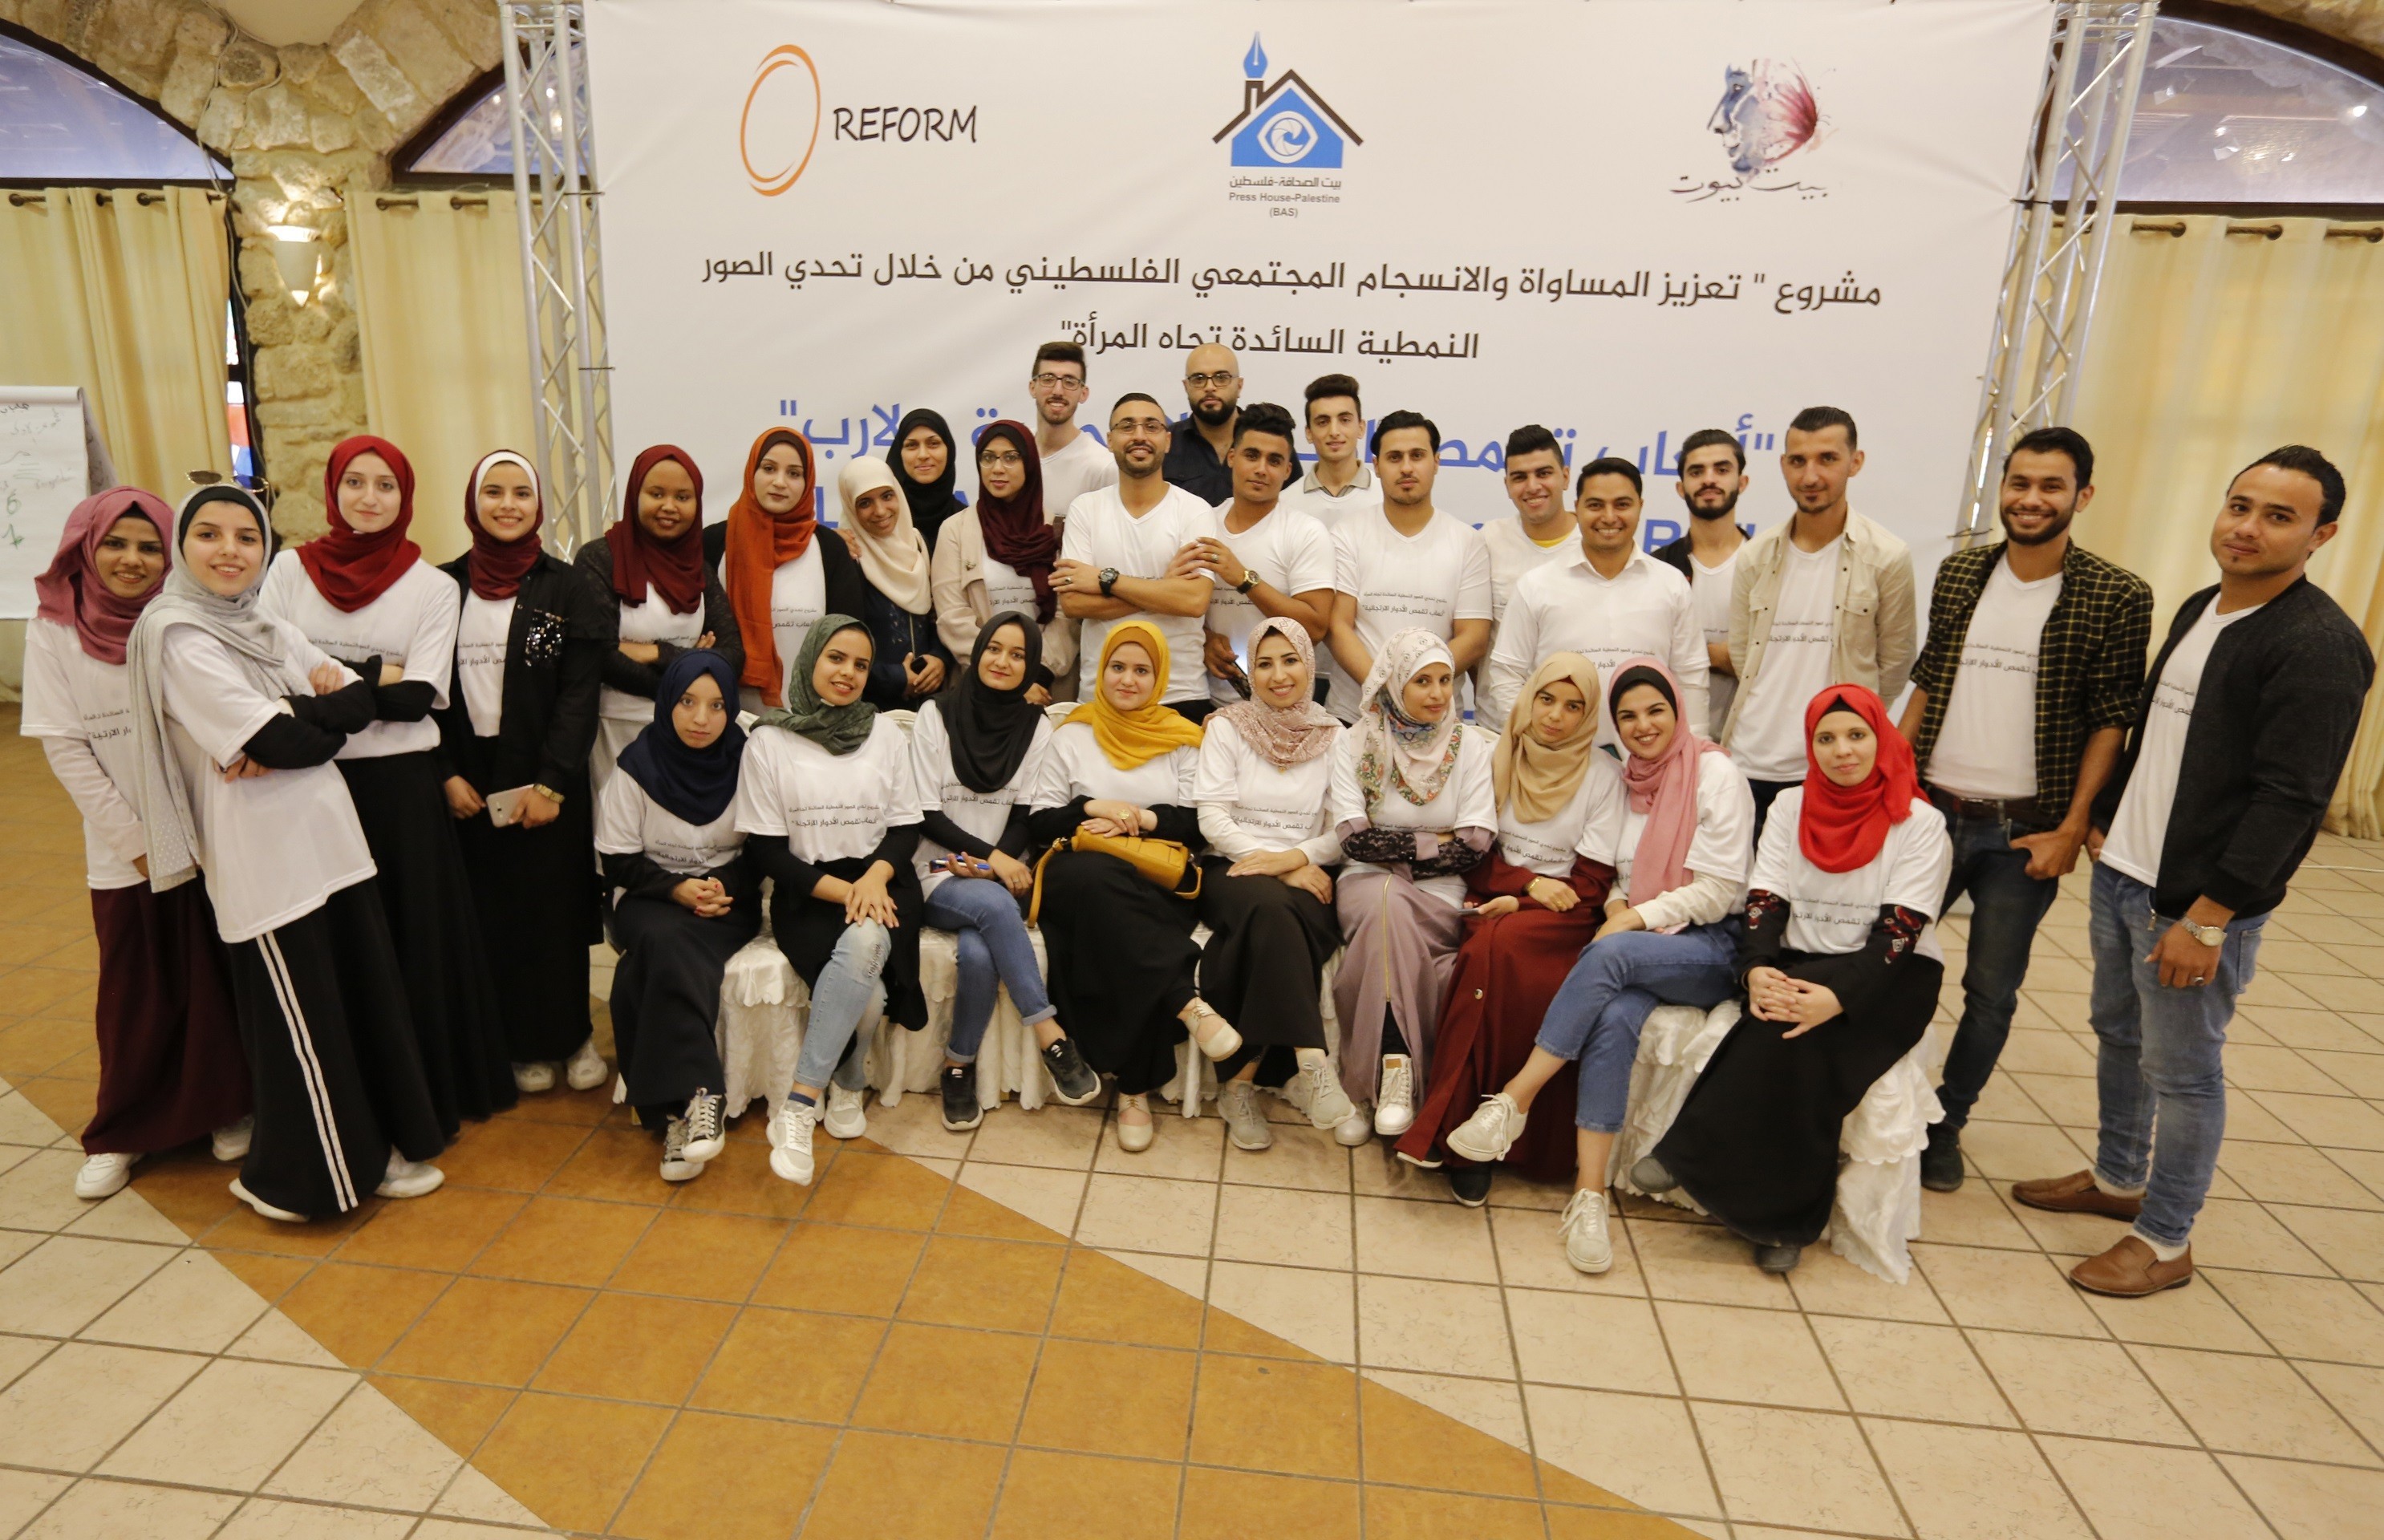 Press House in partnership with REFORM and Bayt Byout concludes a training course